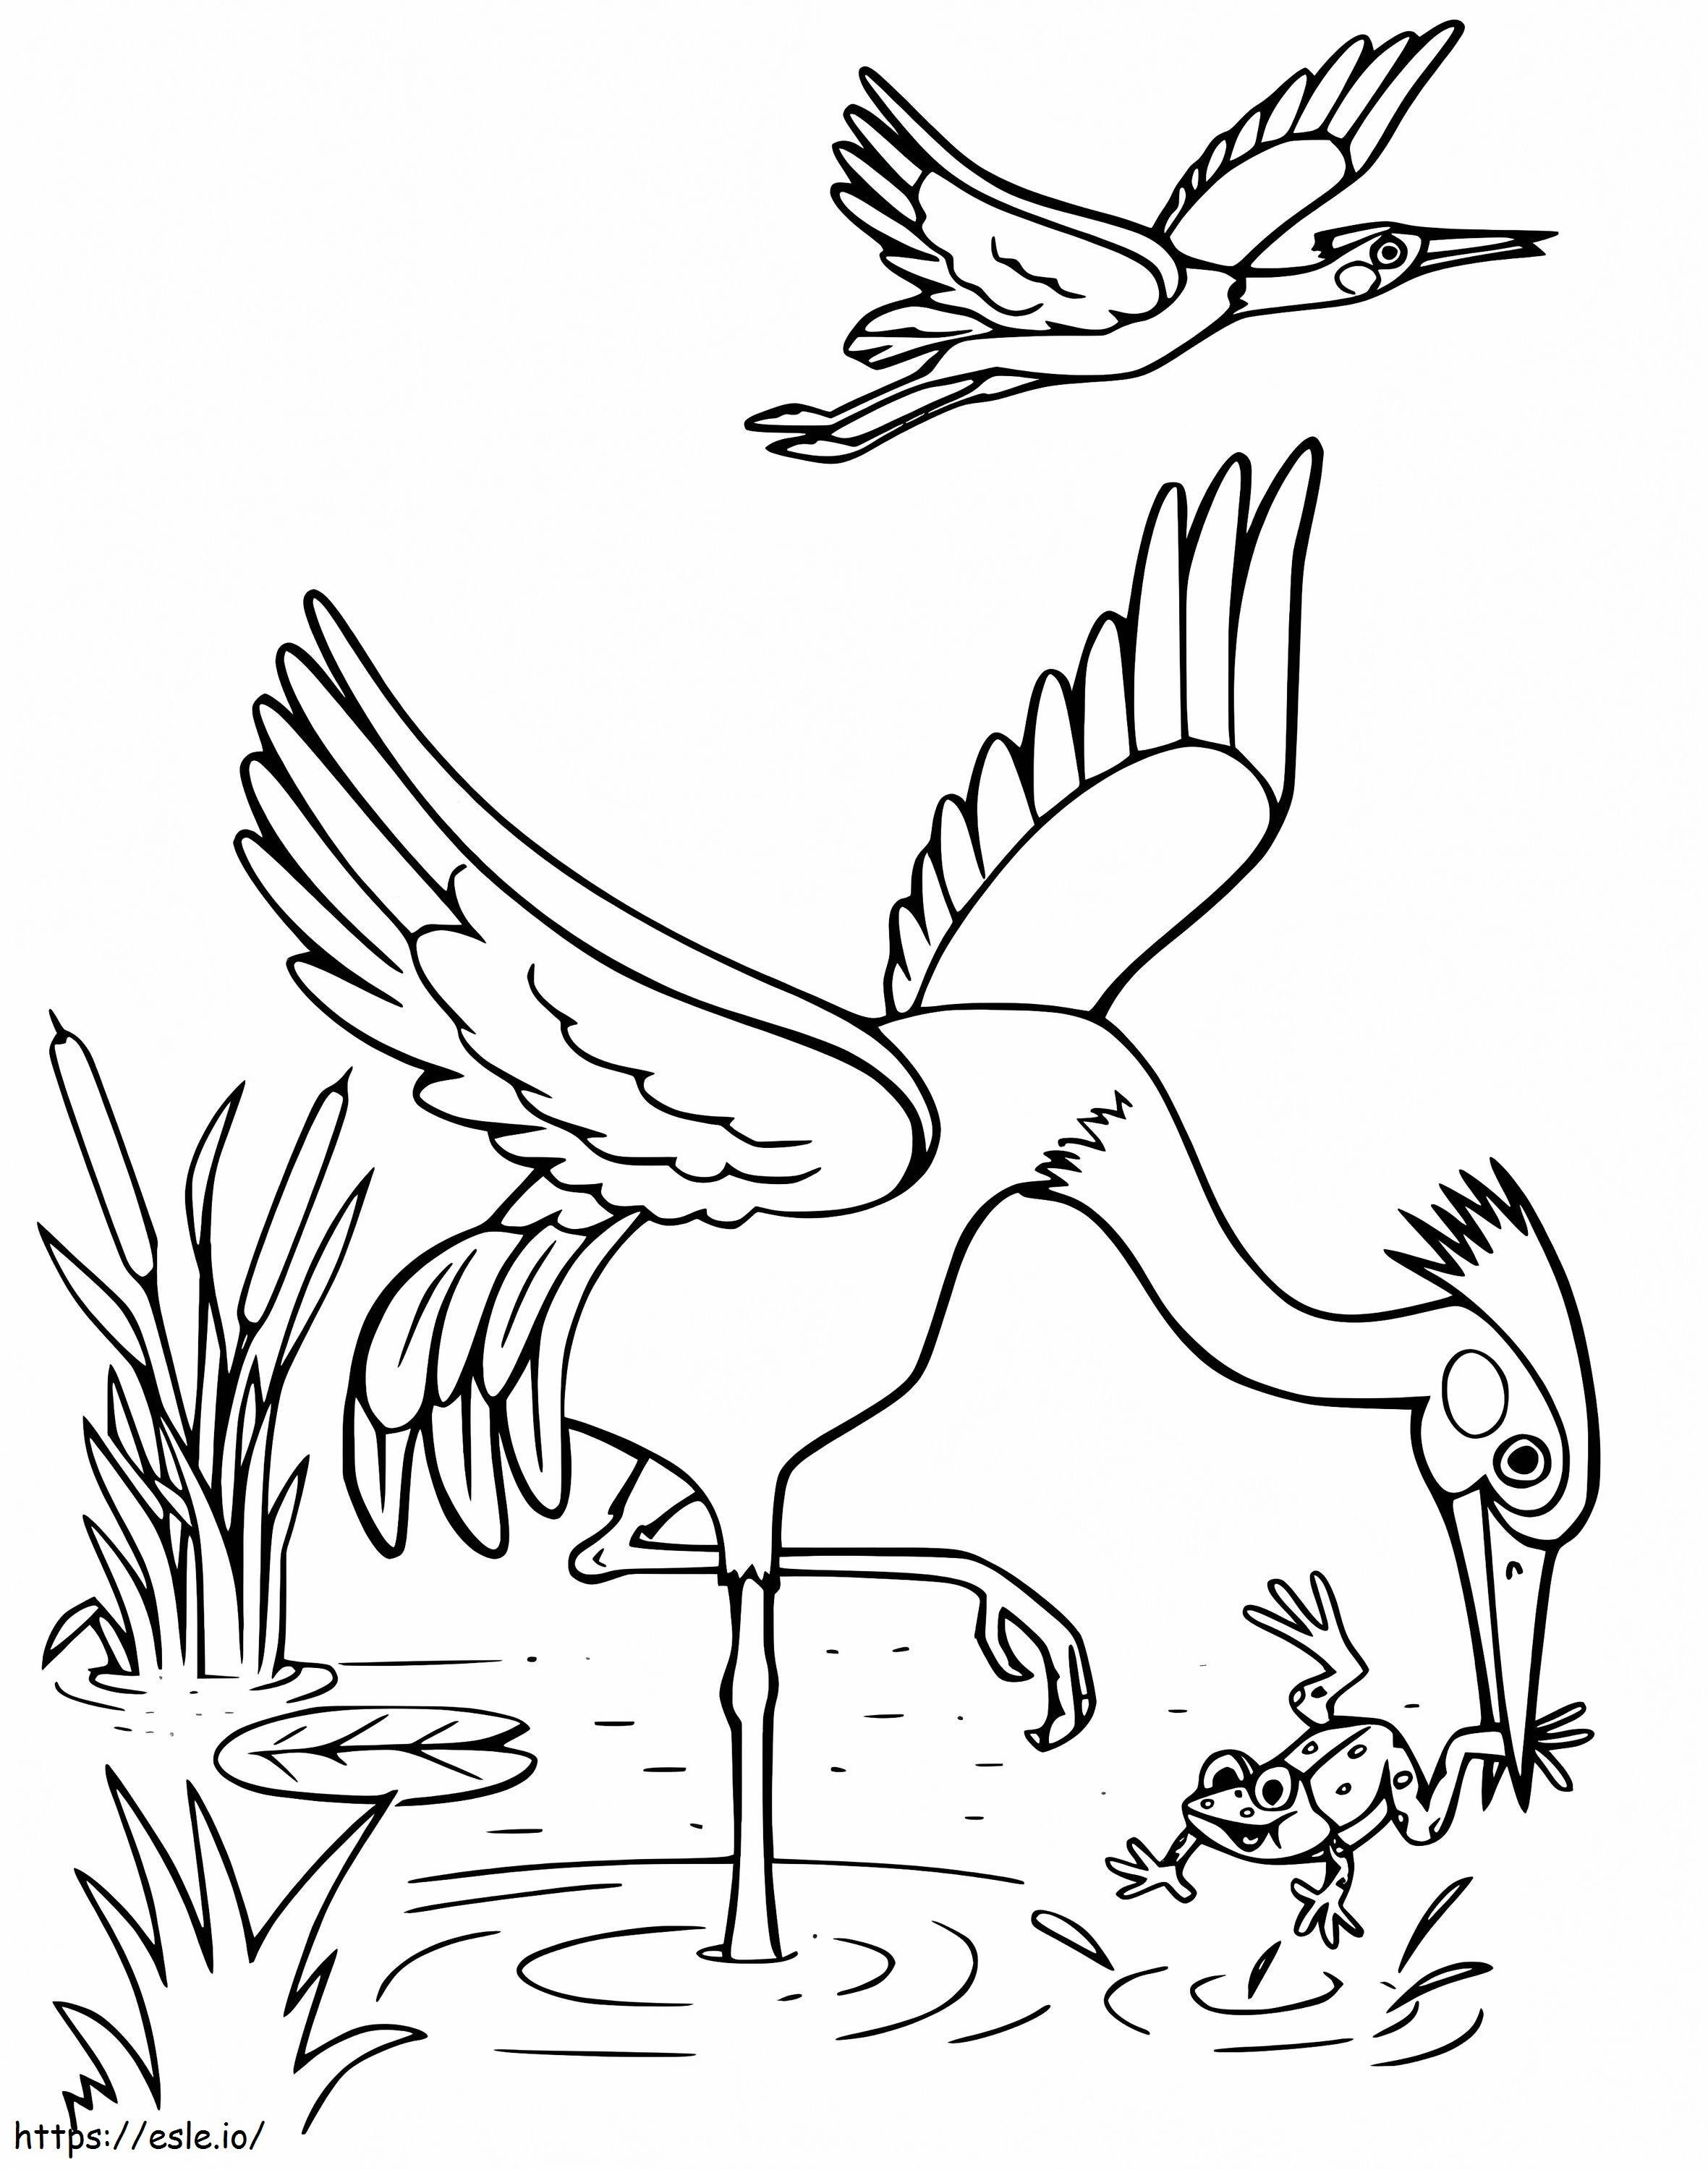 Egrets coloring page